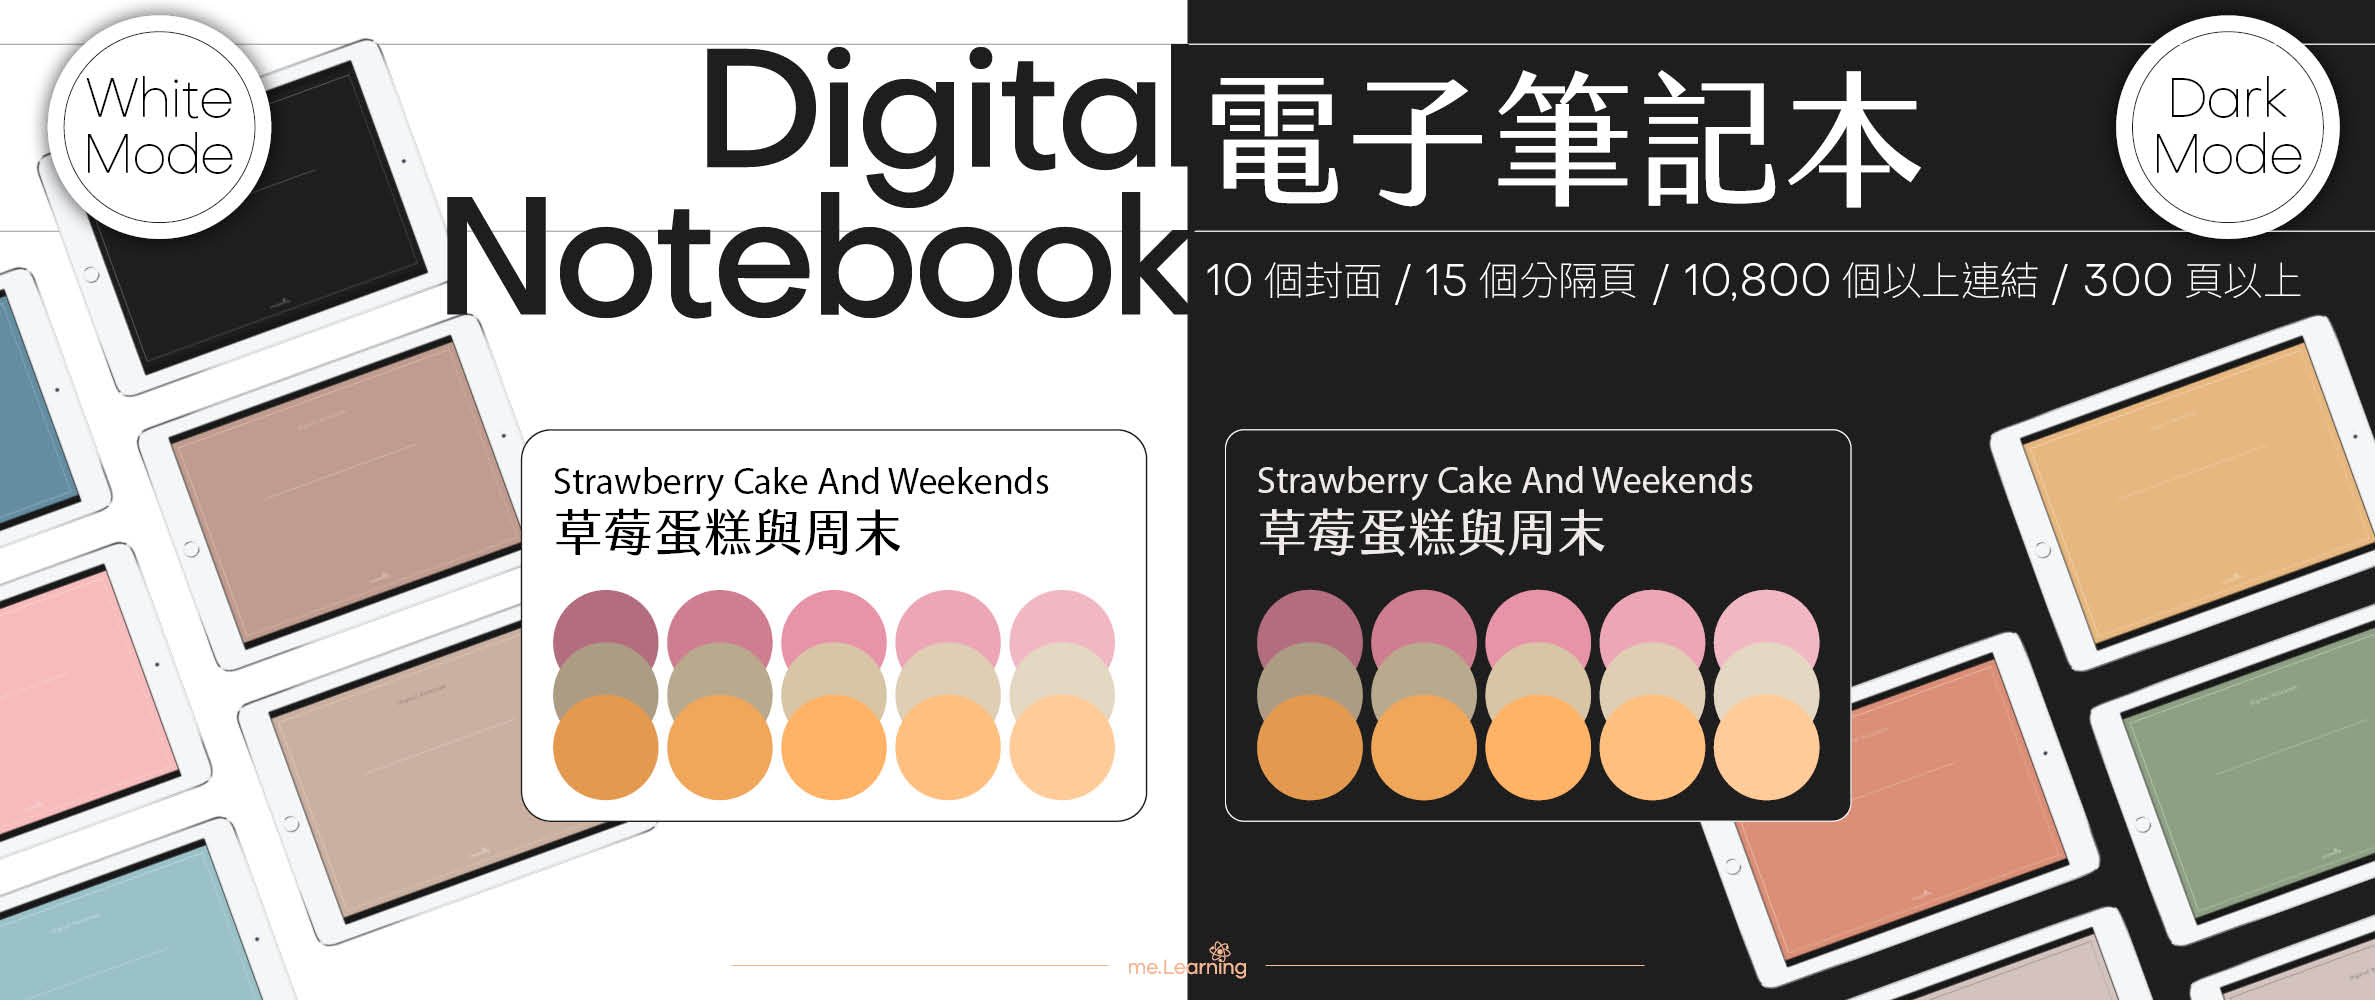 Notebook-Landscape-Solid Color Cover-15 Tabs-Strawberry Cake And Weekends-Dark Mode 不想念書時上市 | me.Learning